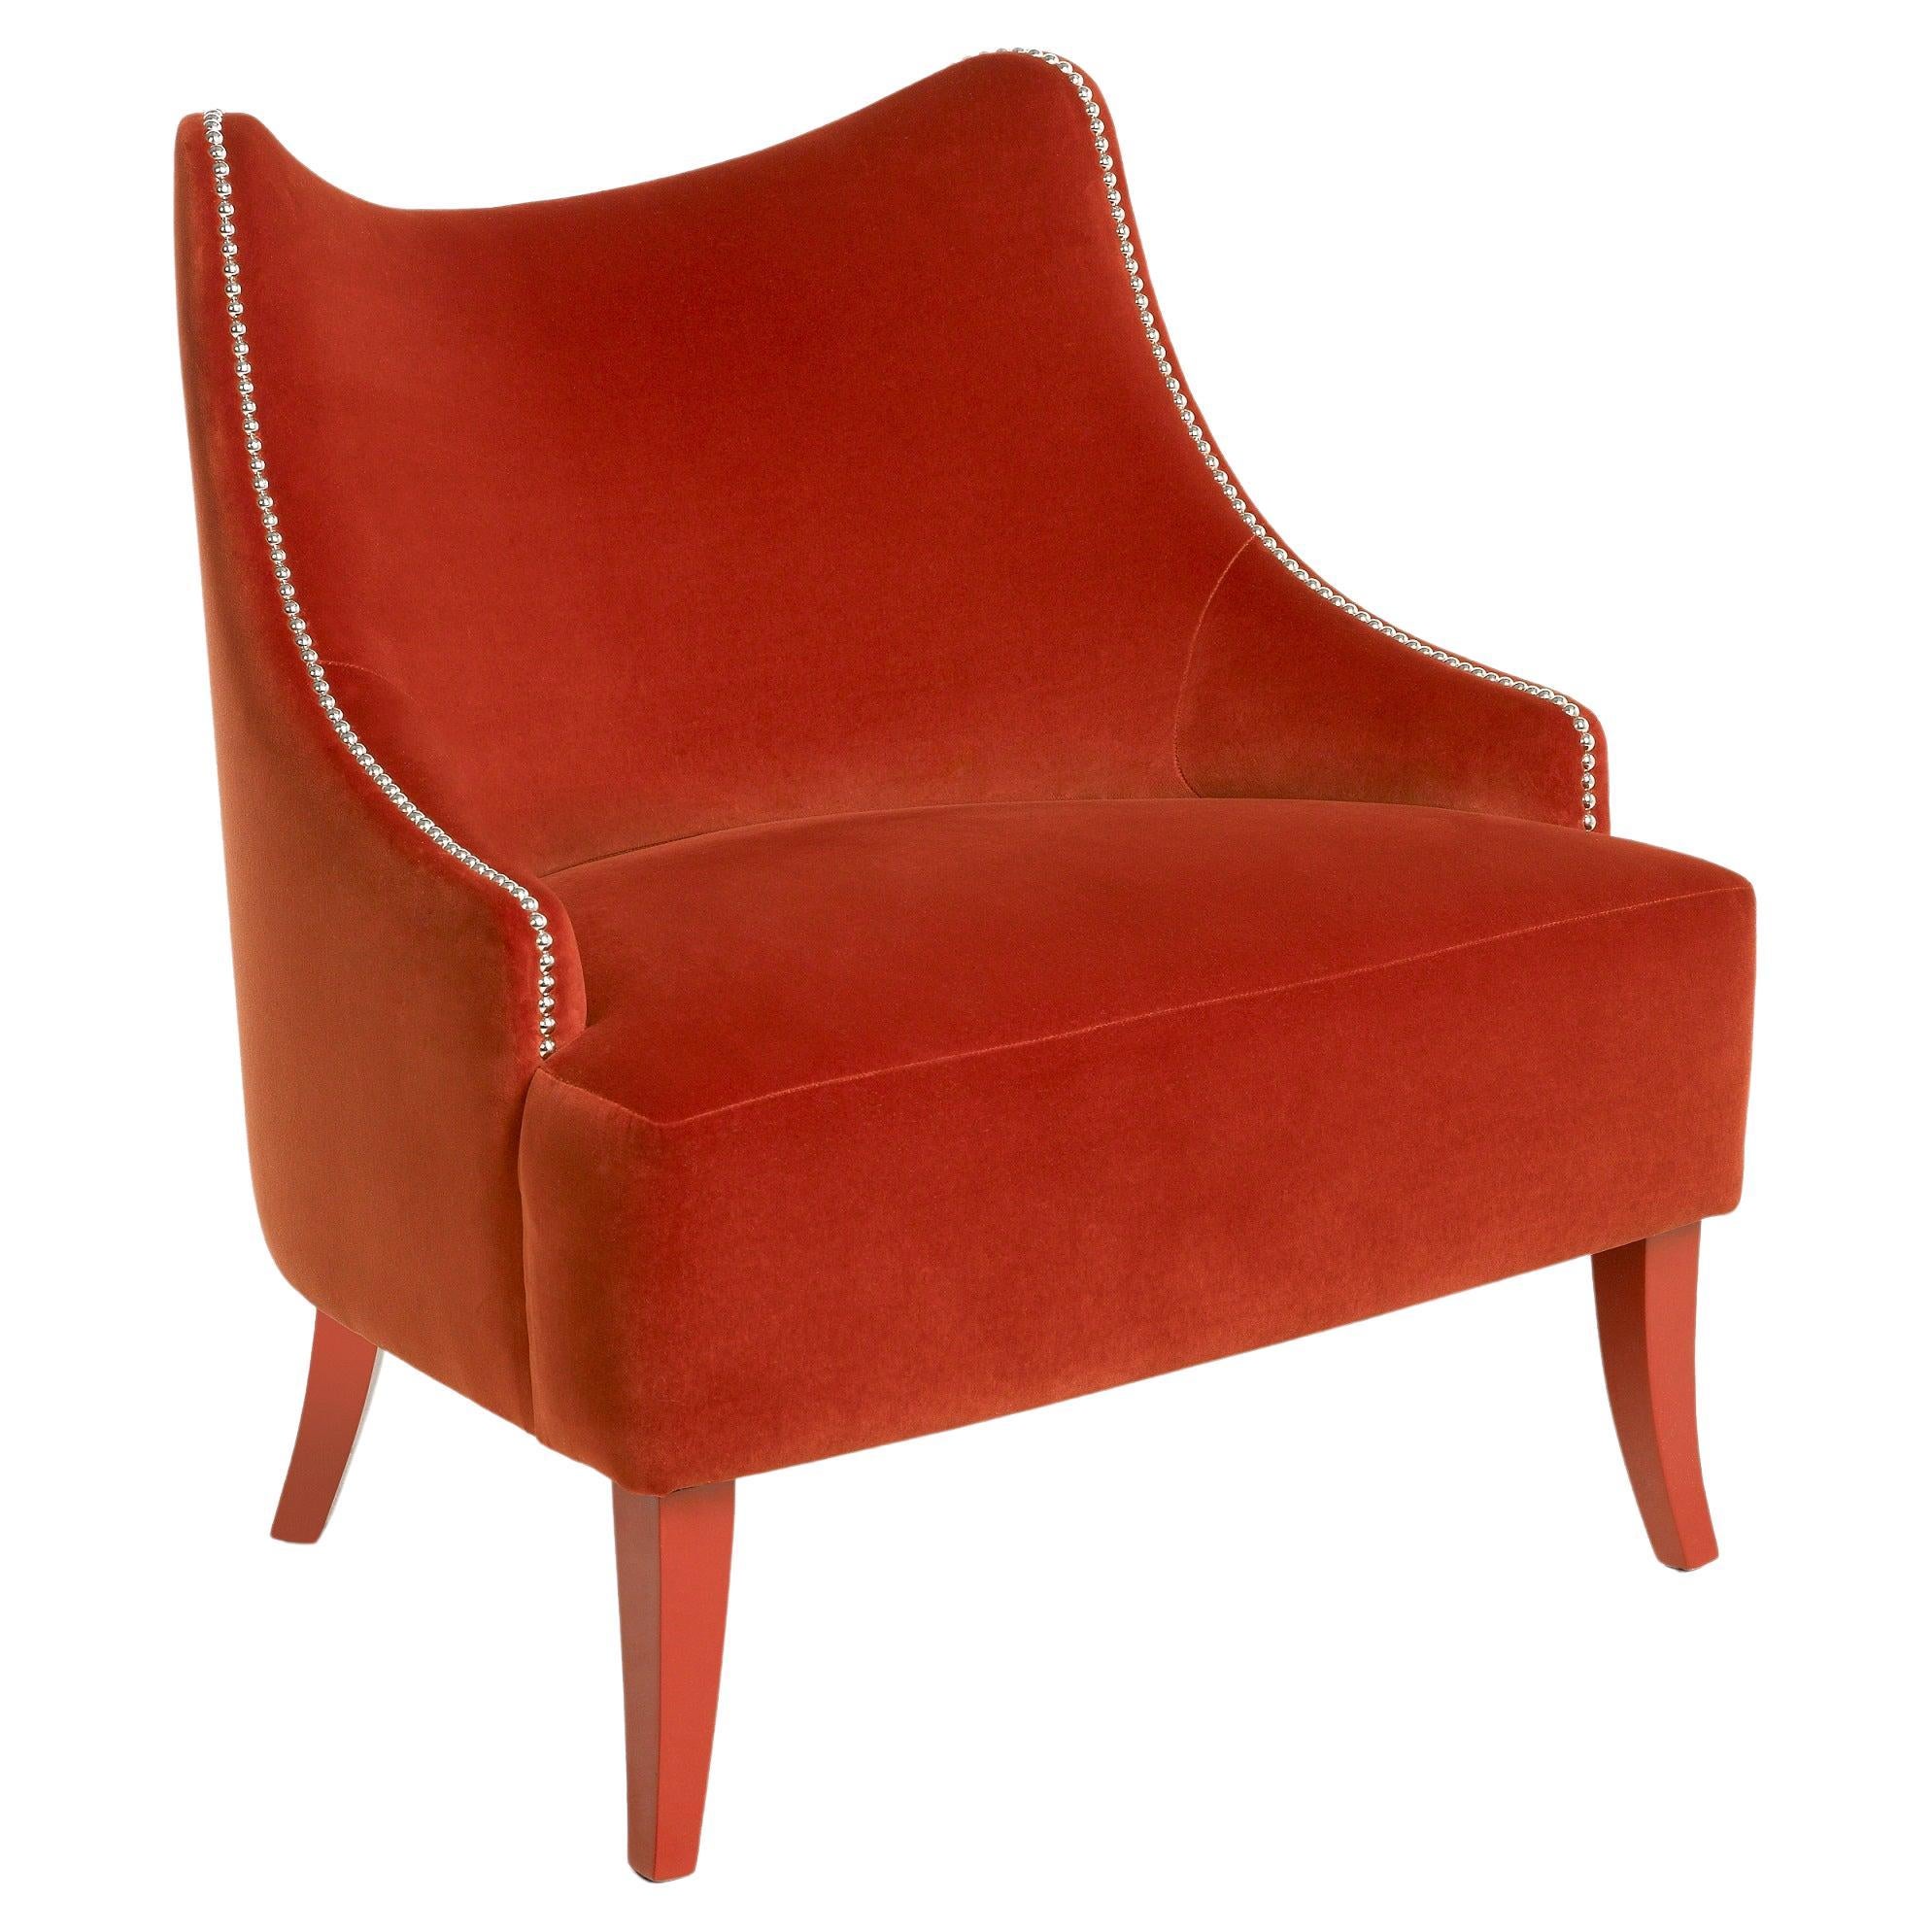 Contemporary Velvet Armchair Offered With Nails On The Curve & Back im Angebot